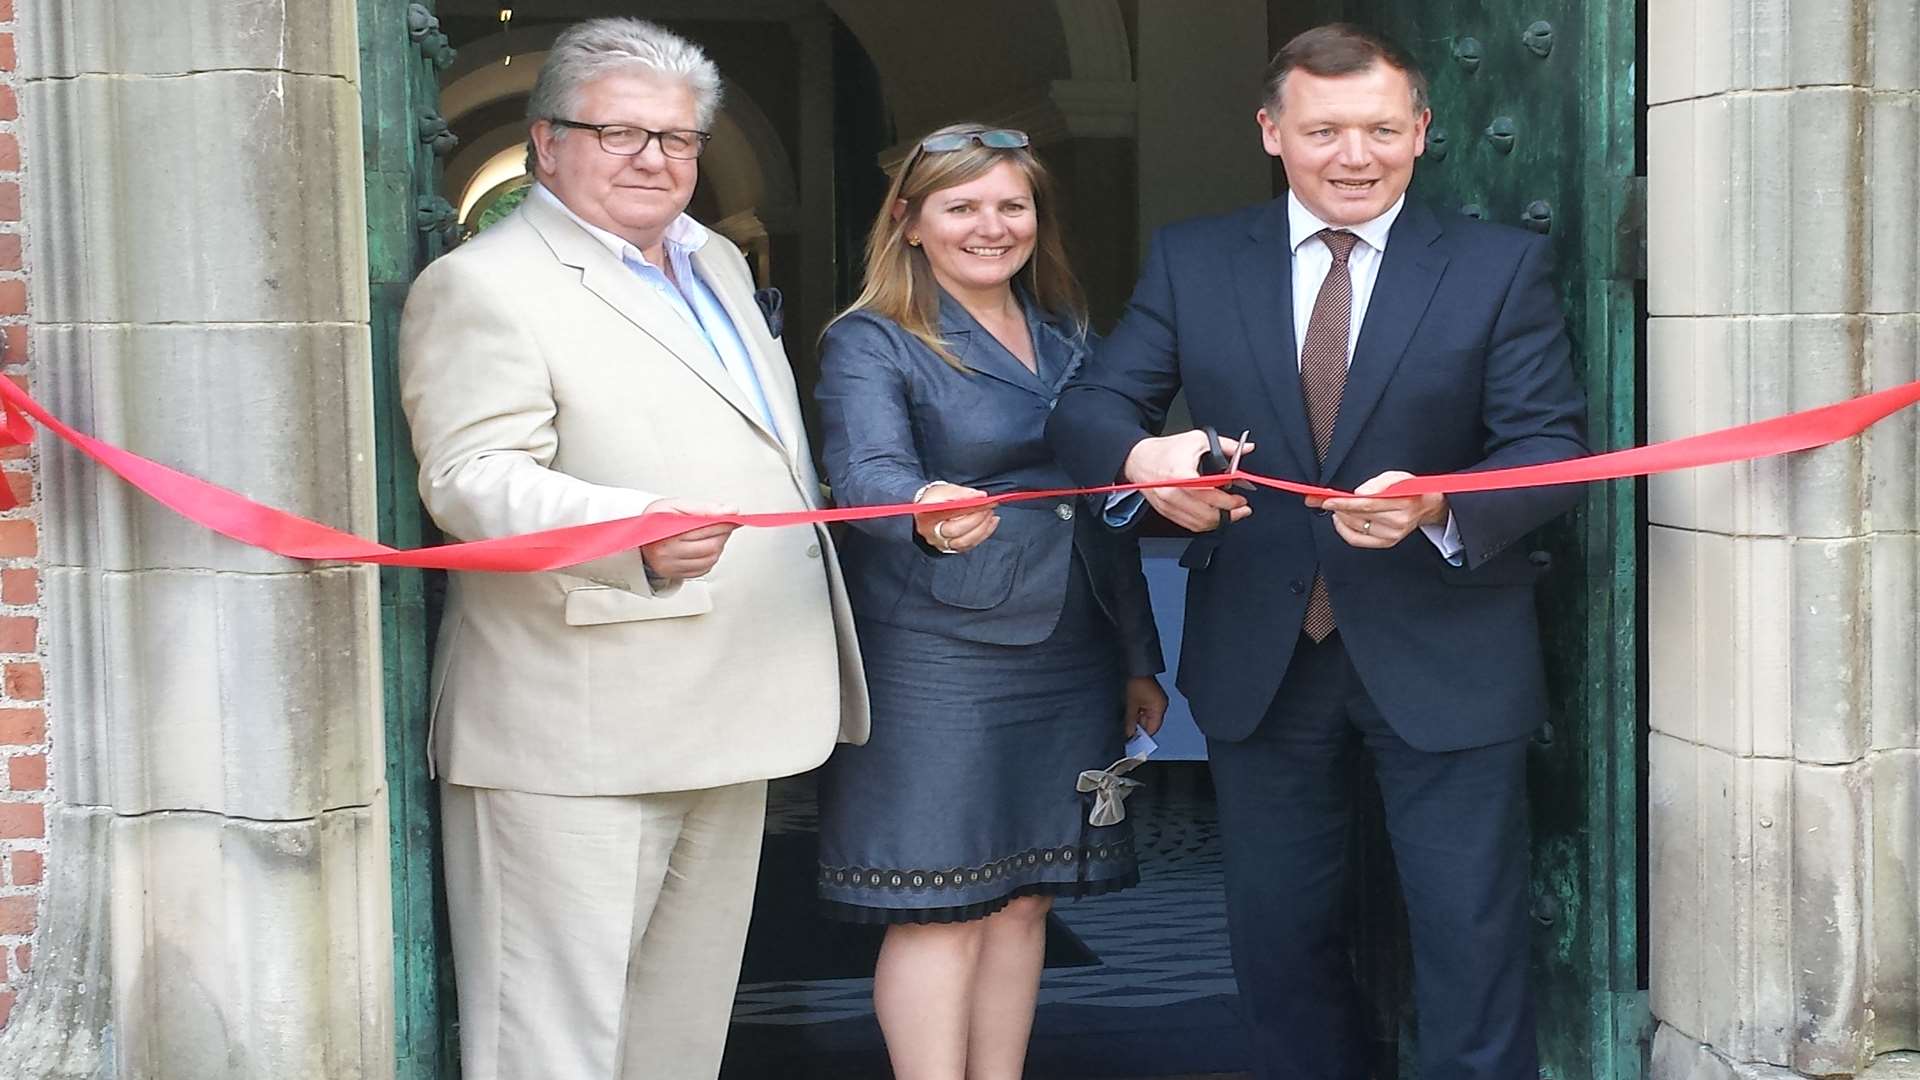 Port Lympne Mansion Hotel is opened by managing director Bob O'Connor, left, hospitality manager Sam Lloyd and Folkestone and Hythe MP Damian Collins